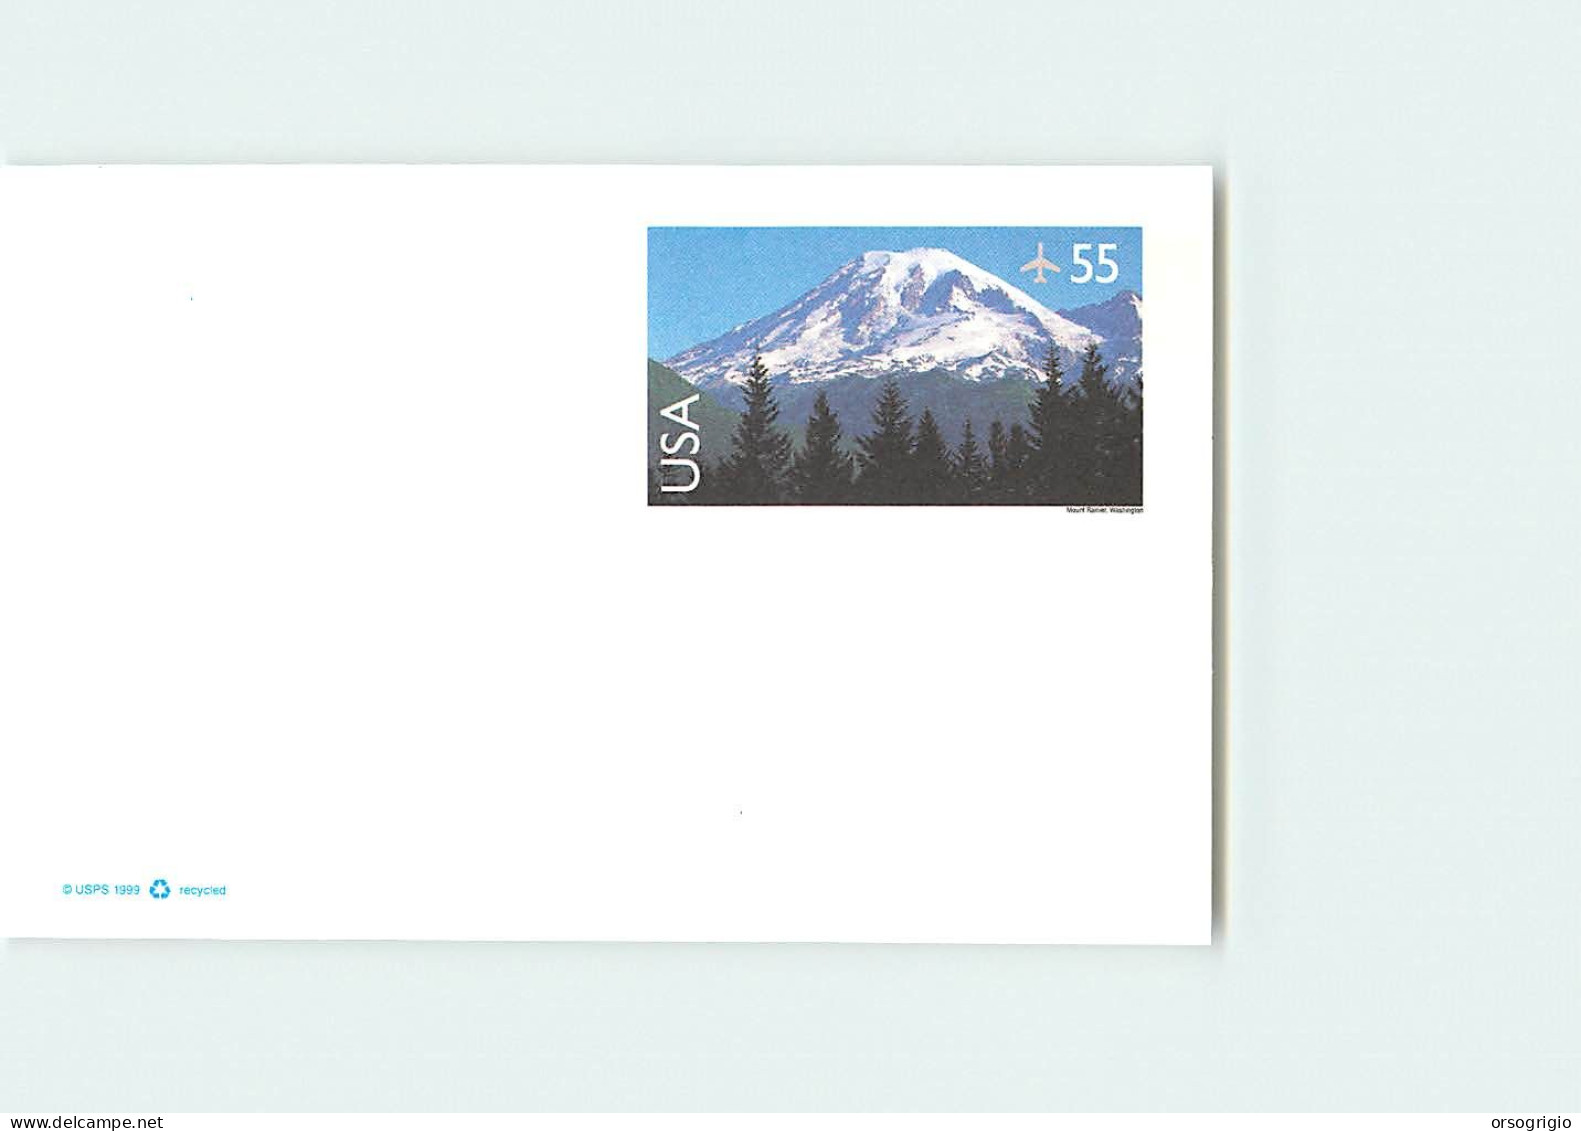 USA - Intero Postale - Stationery - AIR MAIL 55 Cents - 1981-00